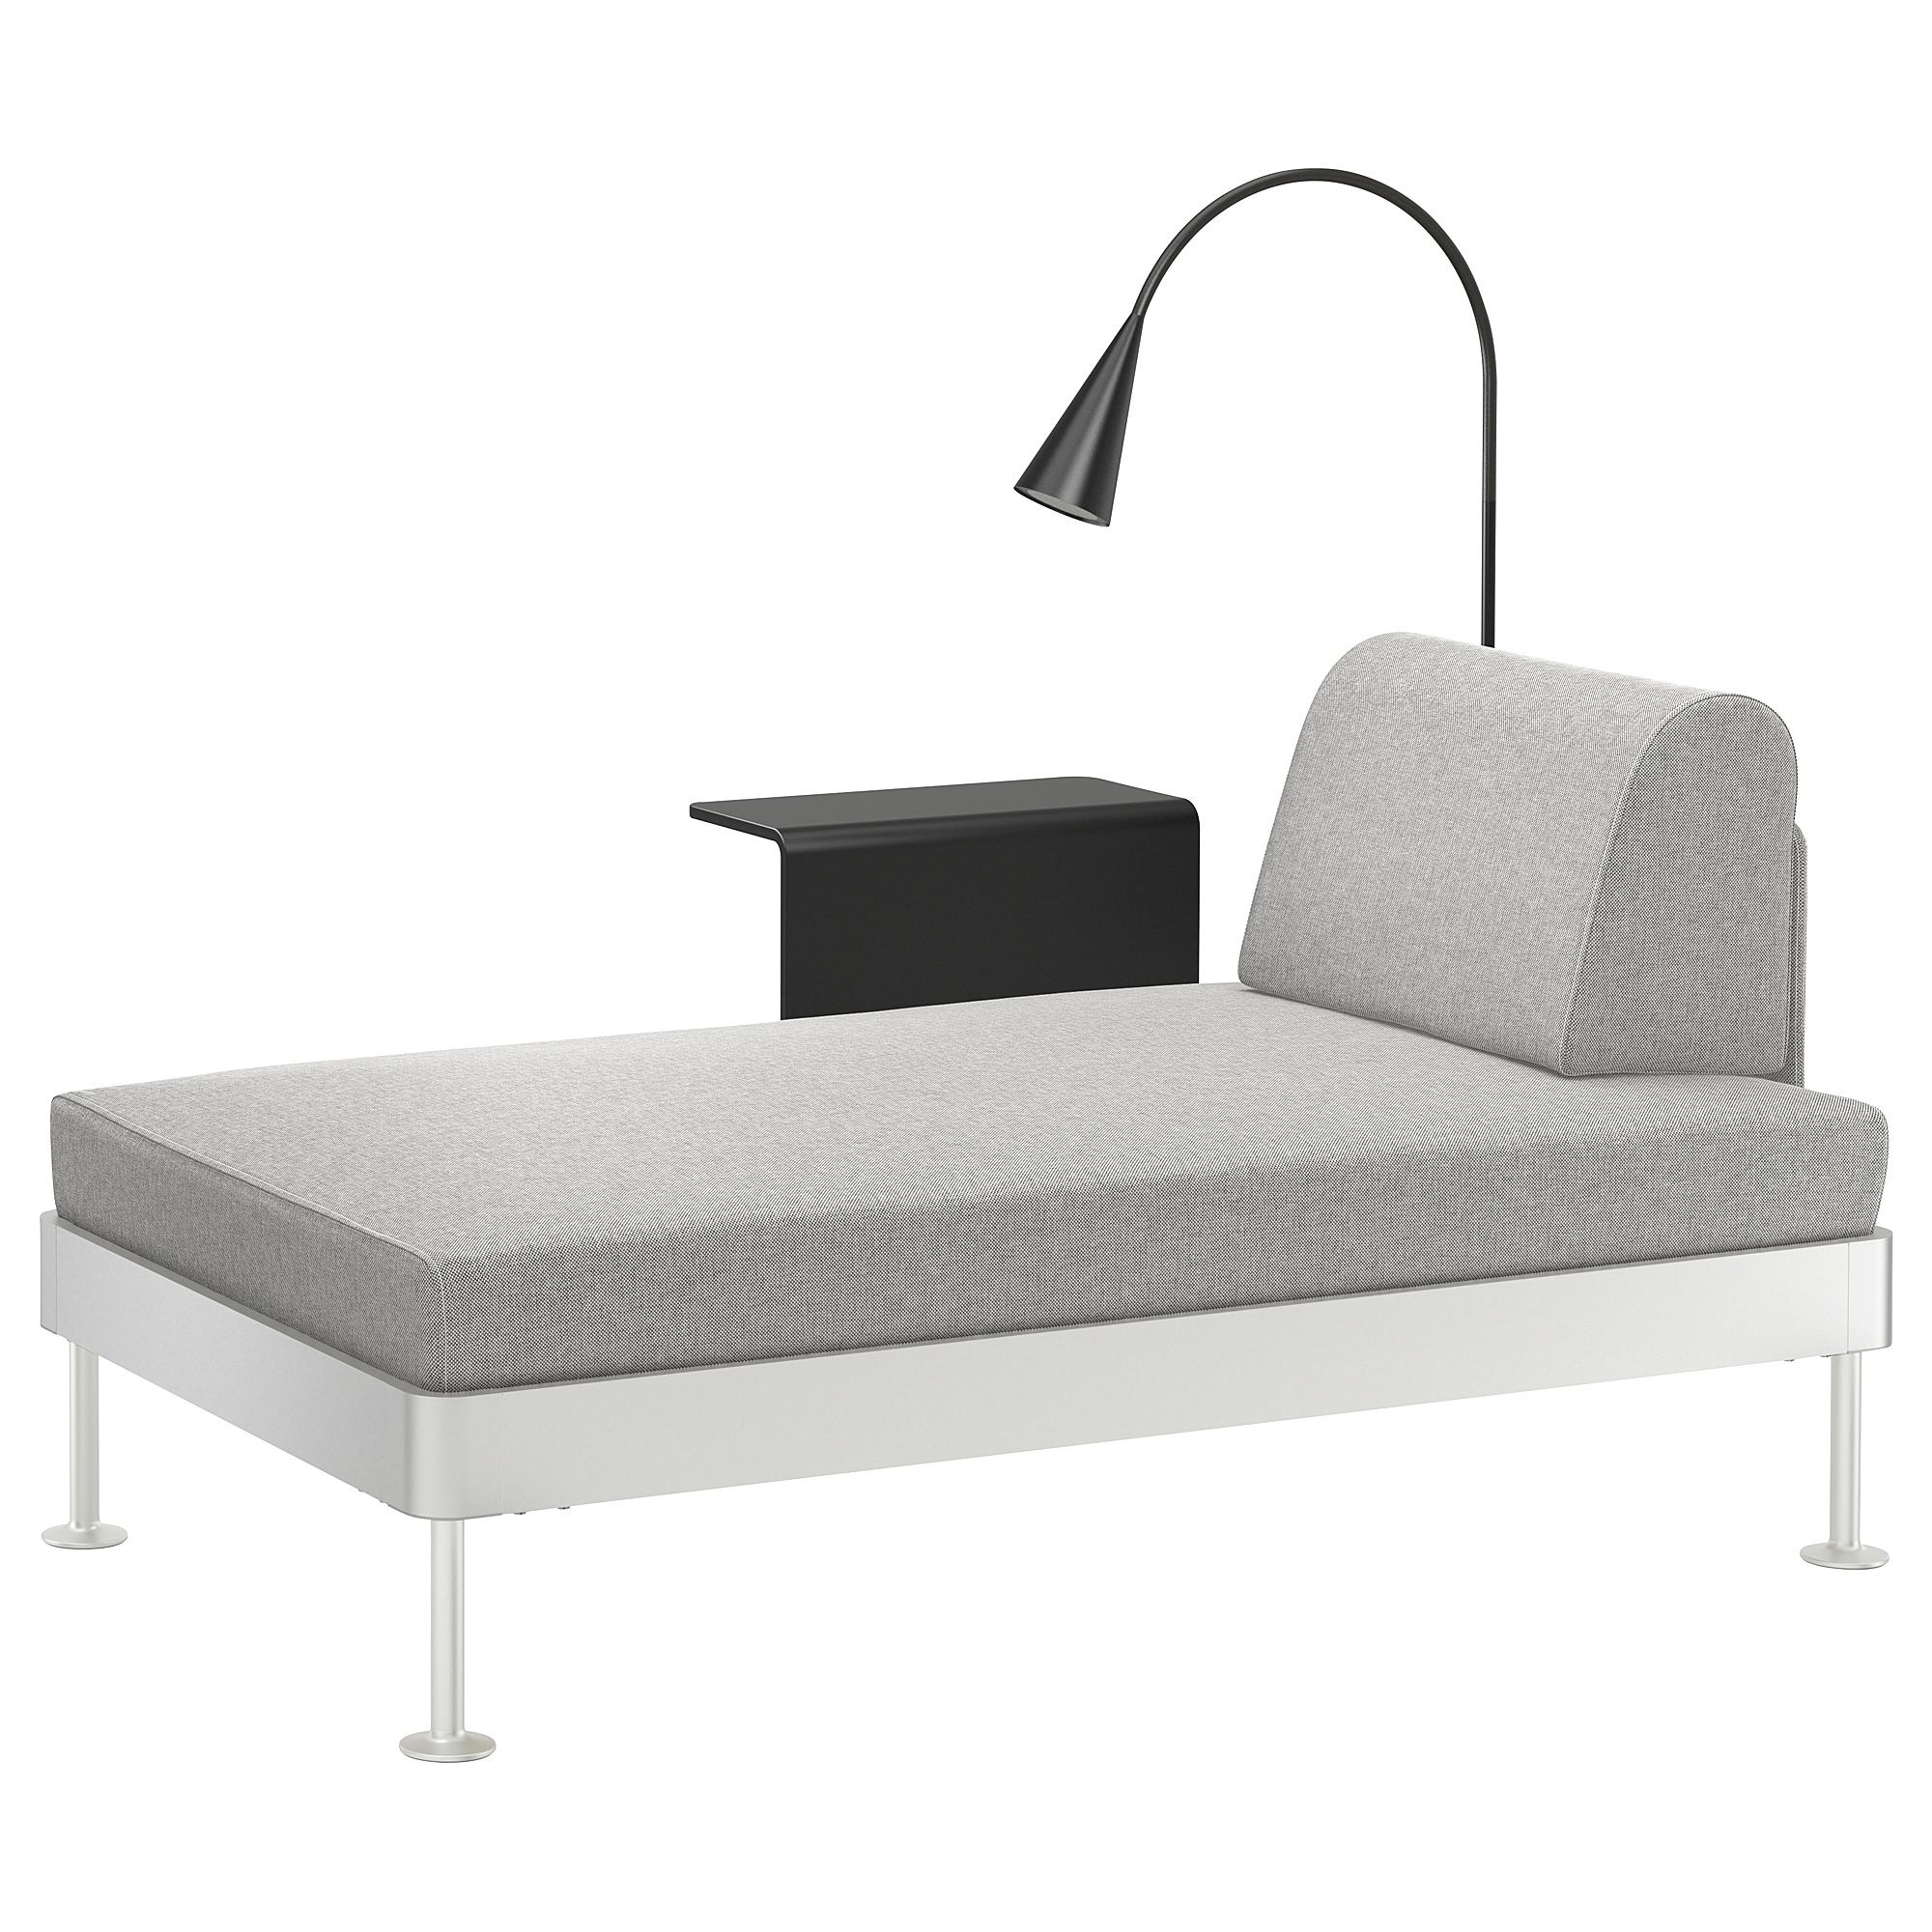 Newest Delaktig Chaise Longue W Side Table And Lamp Tallmyra White/black With Regard To Ikea Chaise Longues (View 8 of 15)